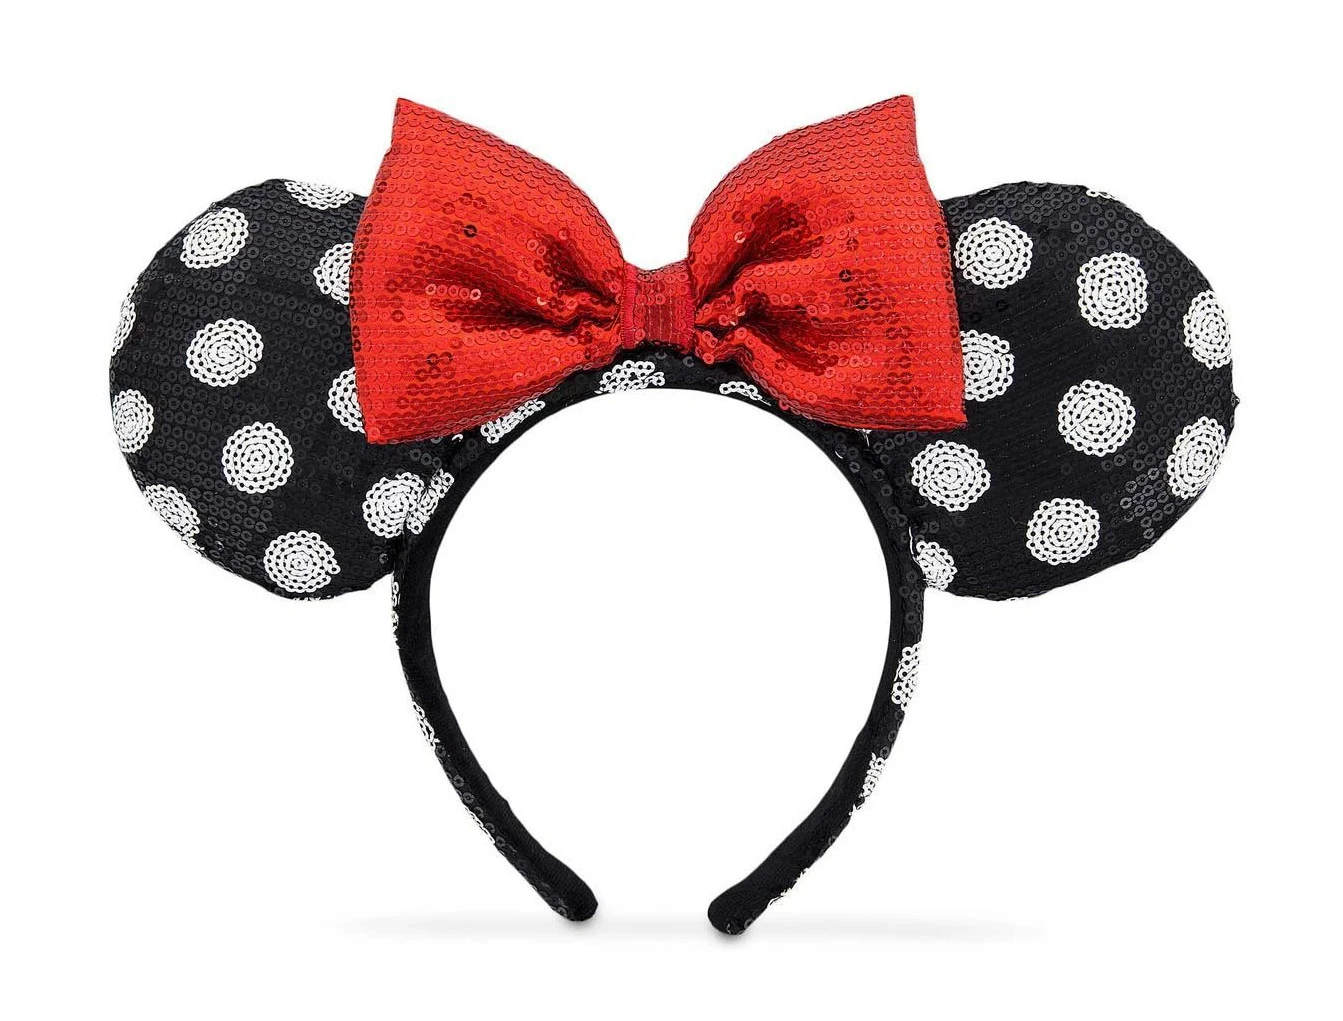 products Disney Parks - Minnie Mouse Ears Headband - Sequined Black Ears with White Polka Dots - Red Bow